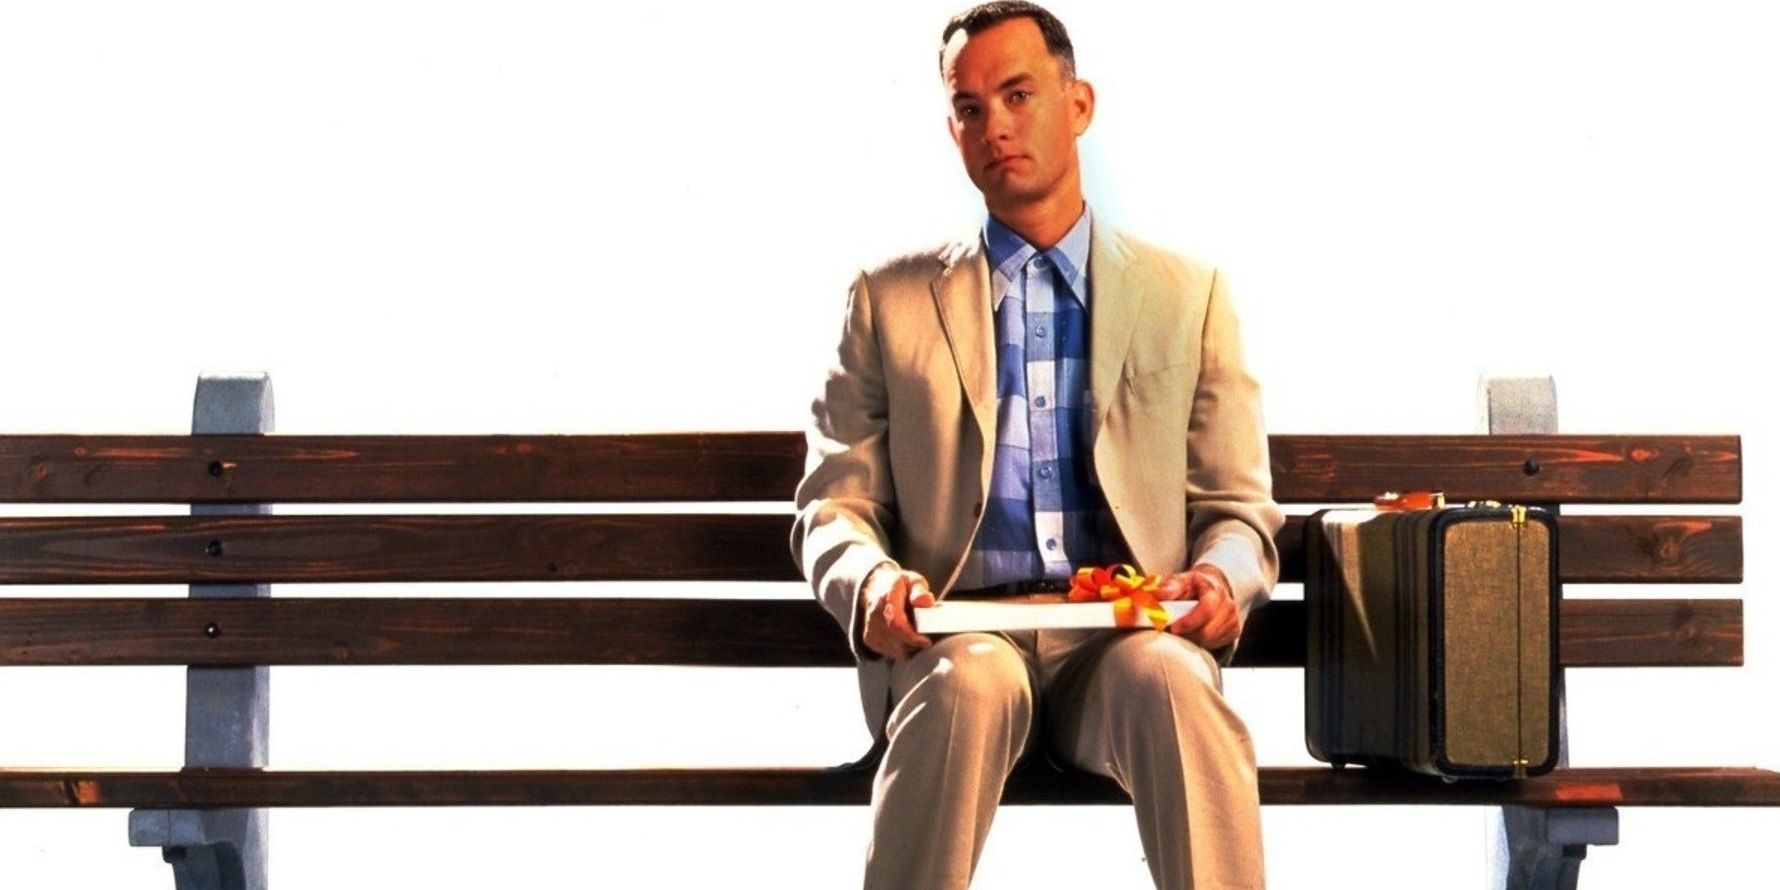 Like A Box Of Chocolates: 10 Wild Behind The Scenes Facts About Forrest Gump